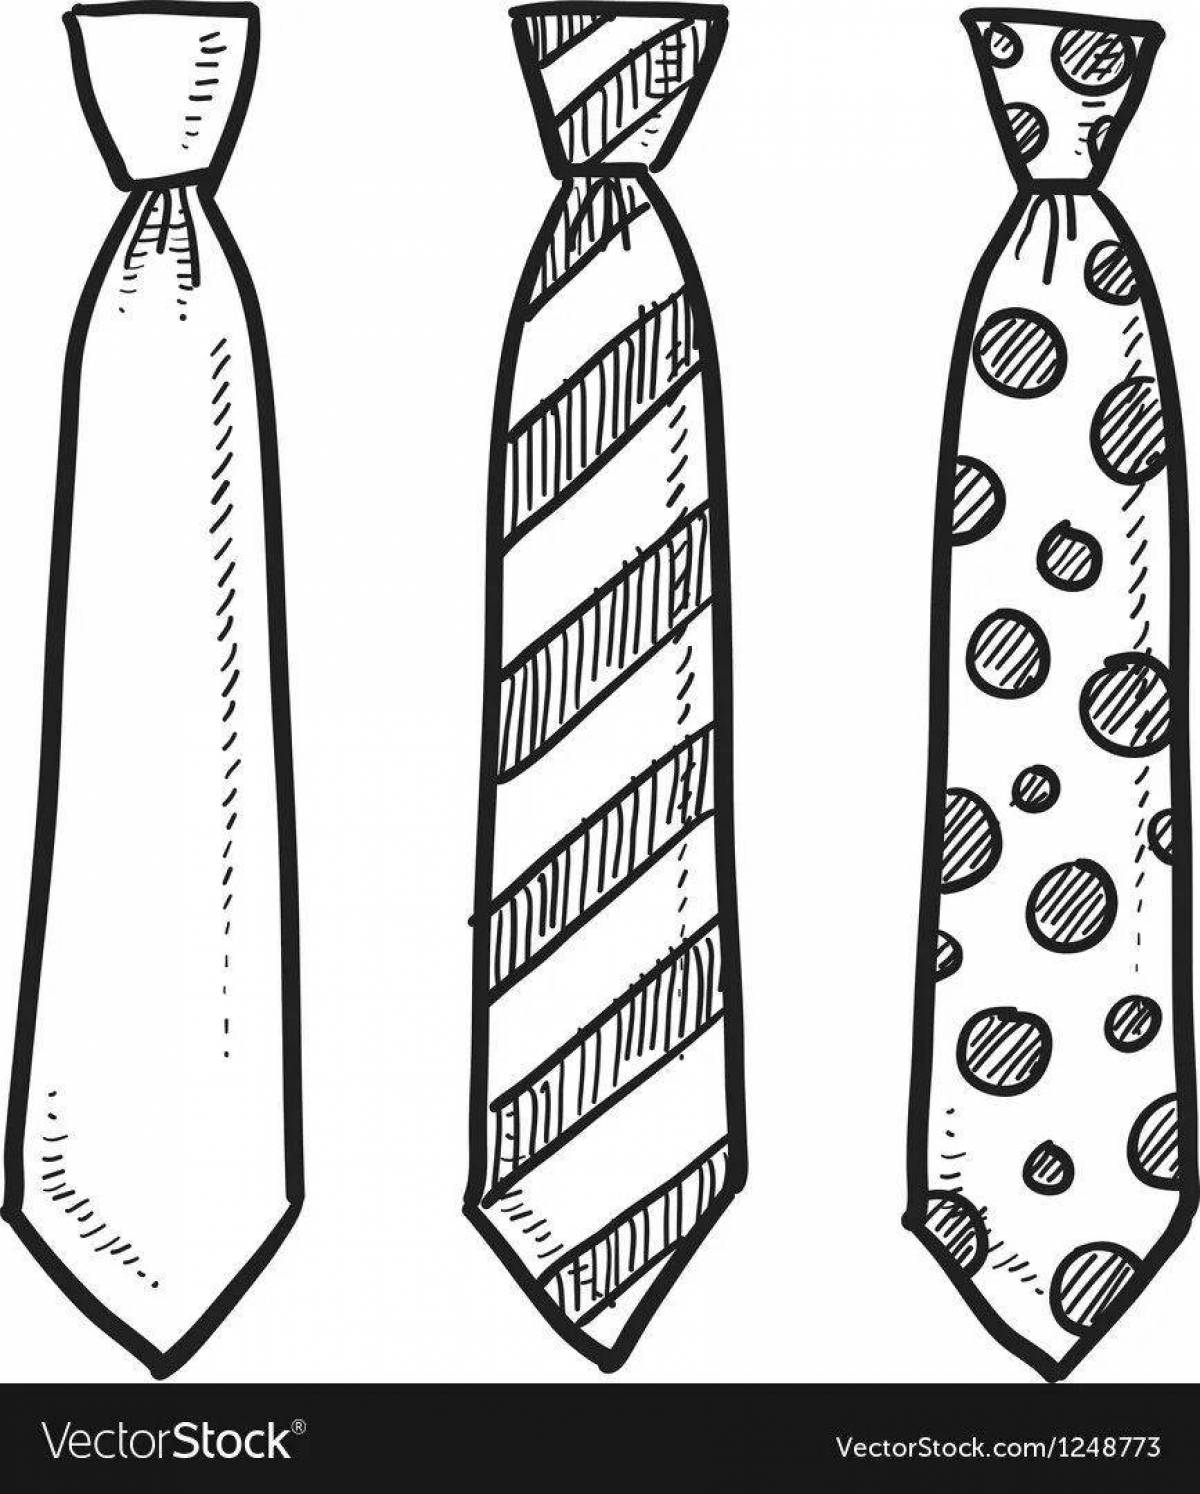 Dashing tie coloring page for dad